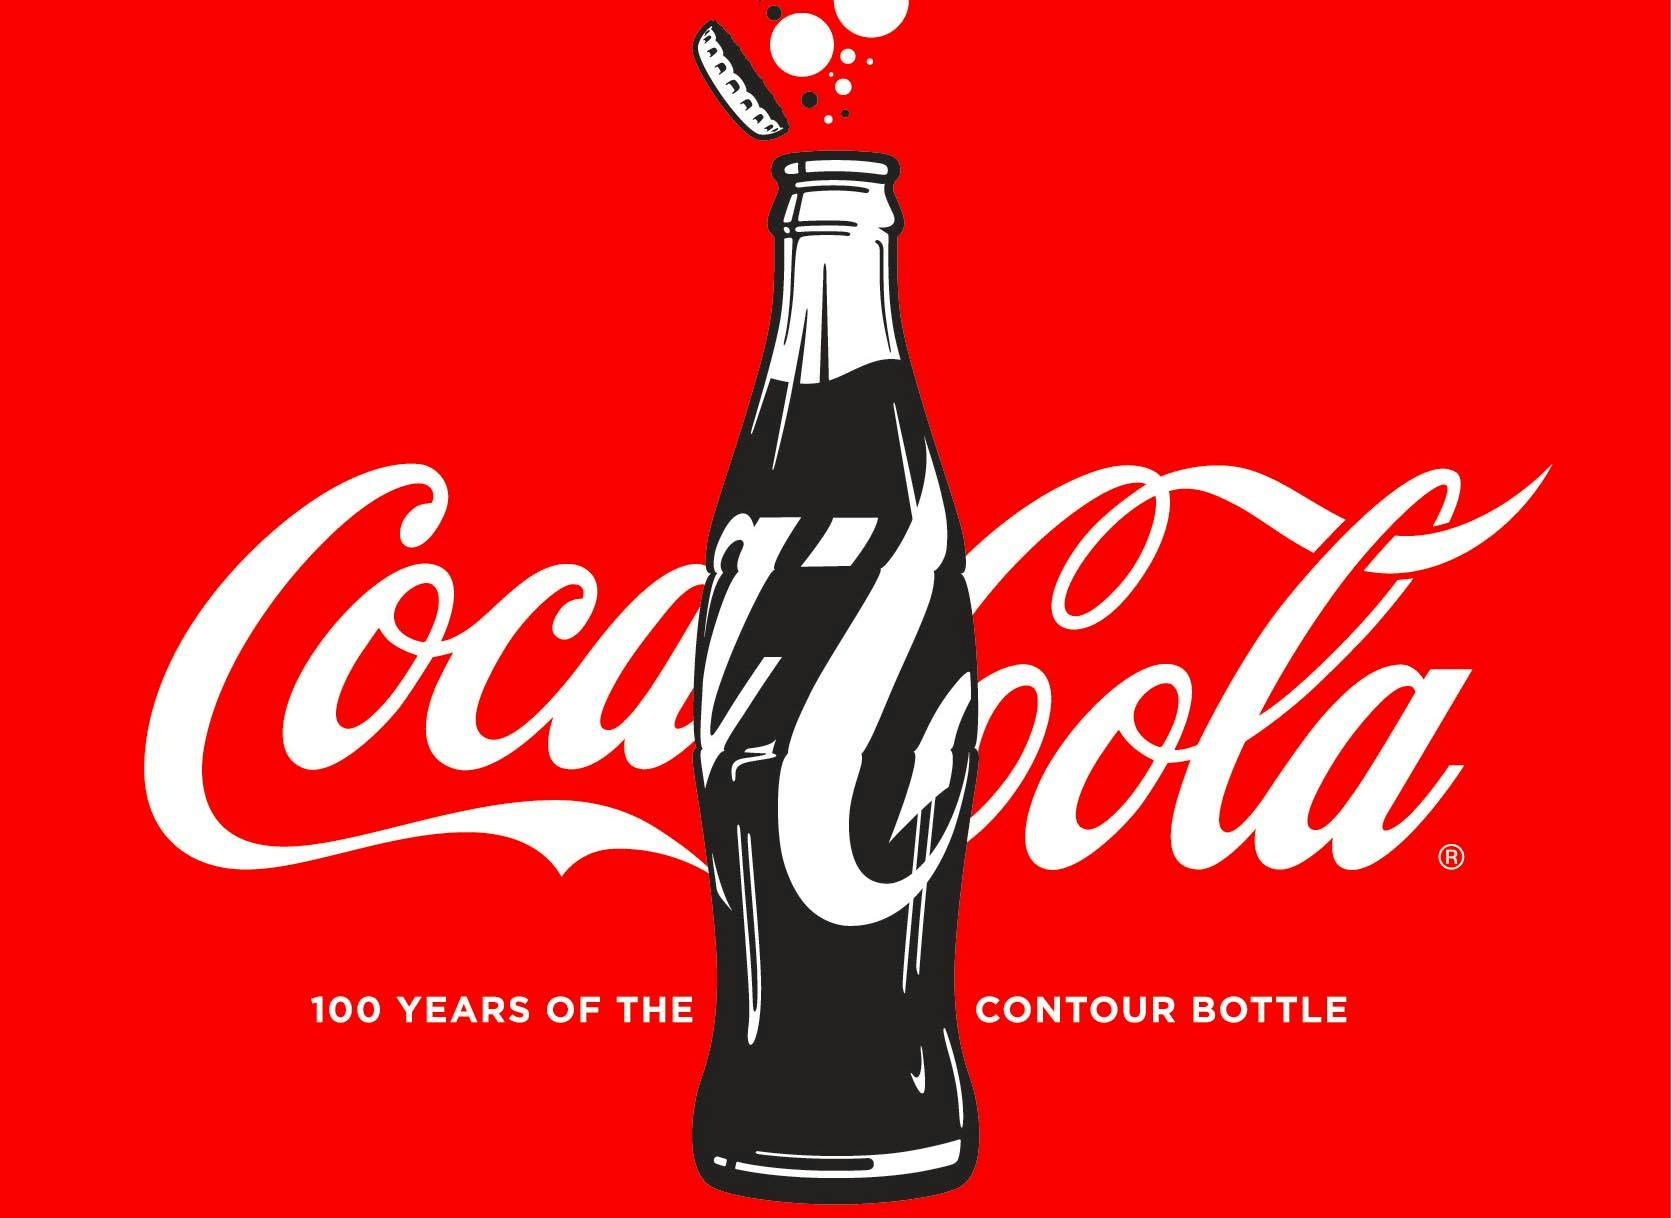 CocaCola’s global boss of sparkling brands on marketing culture